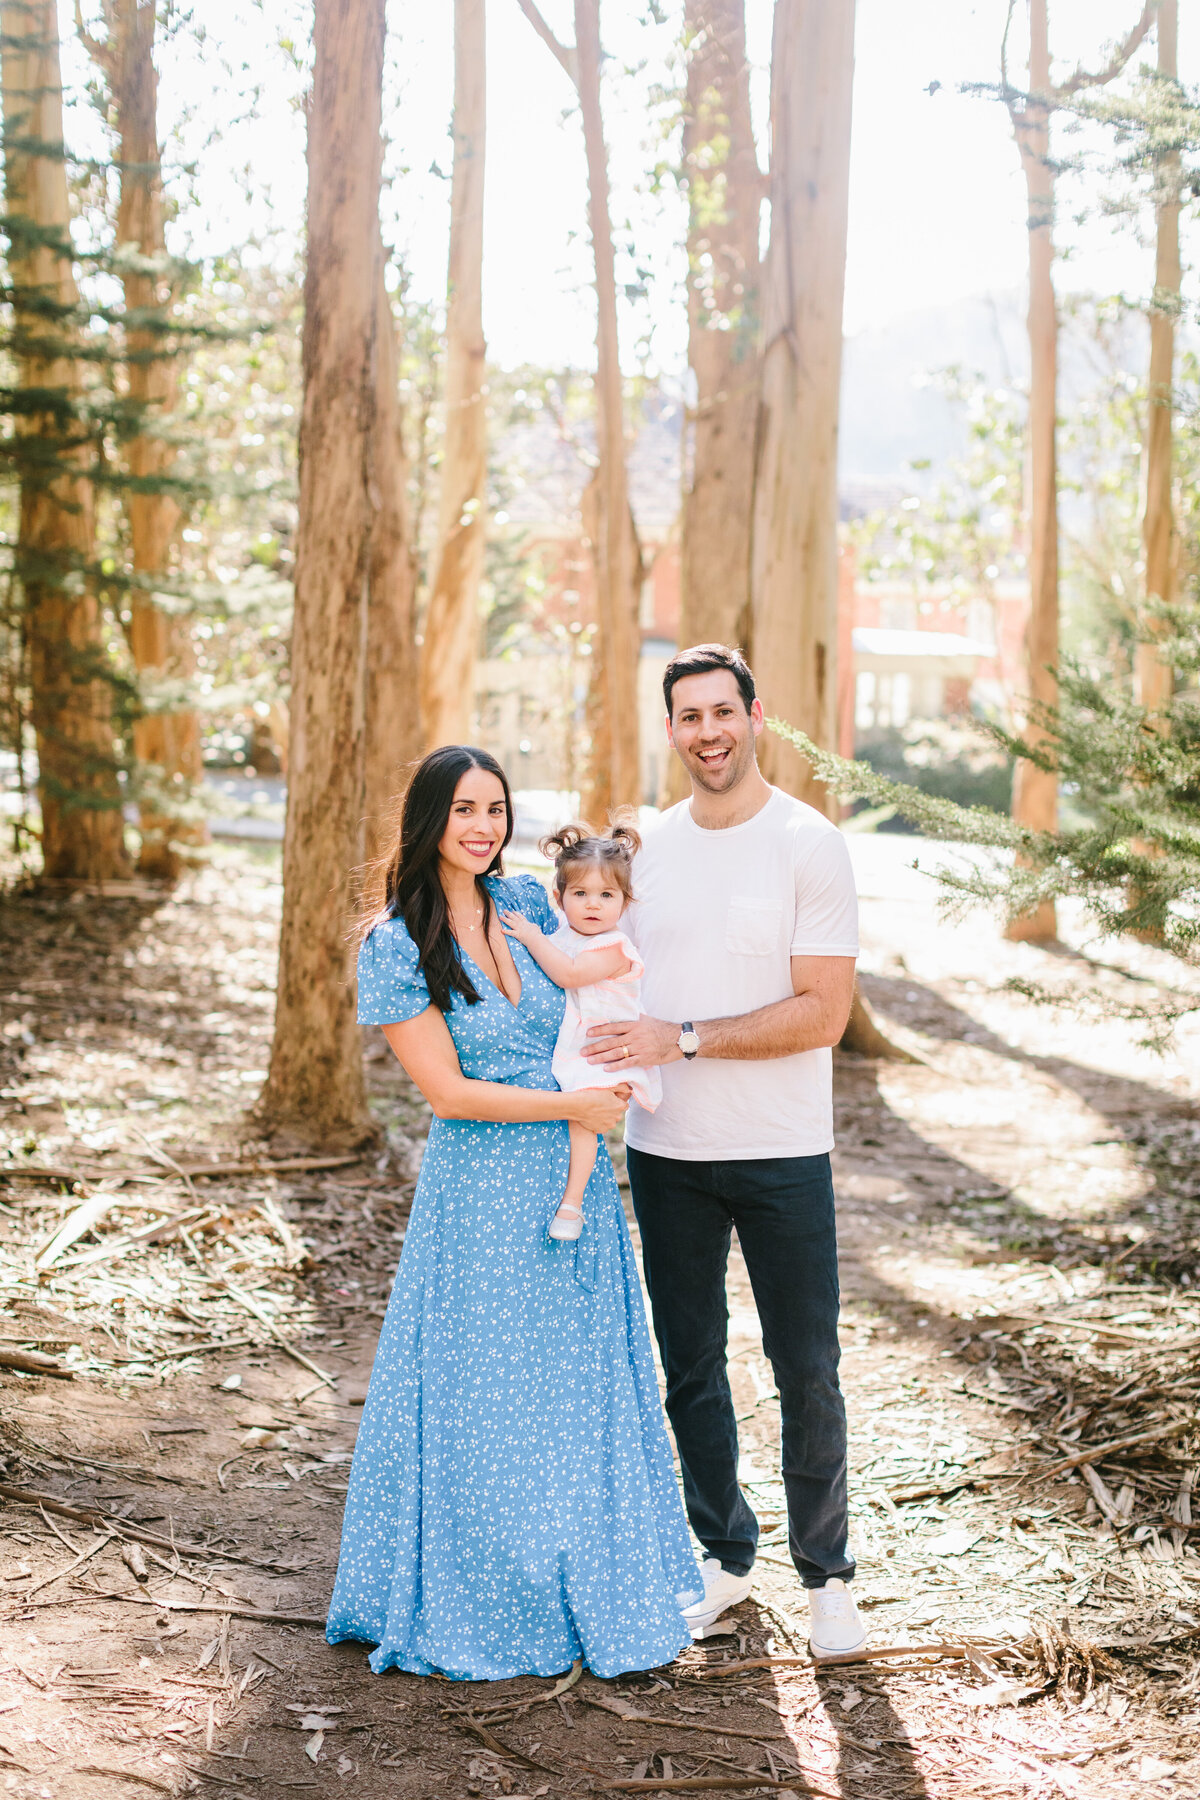 Best California and Texas Family Photographer-Jodee Debes Photography-208